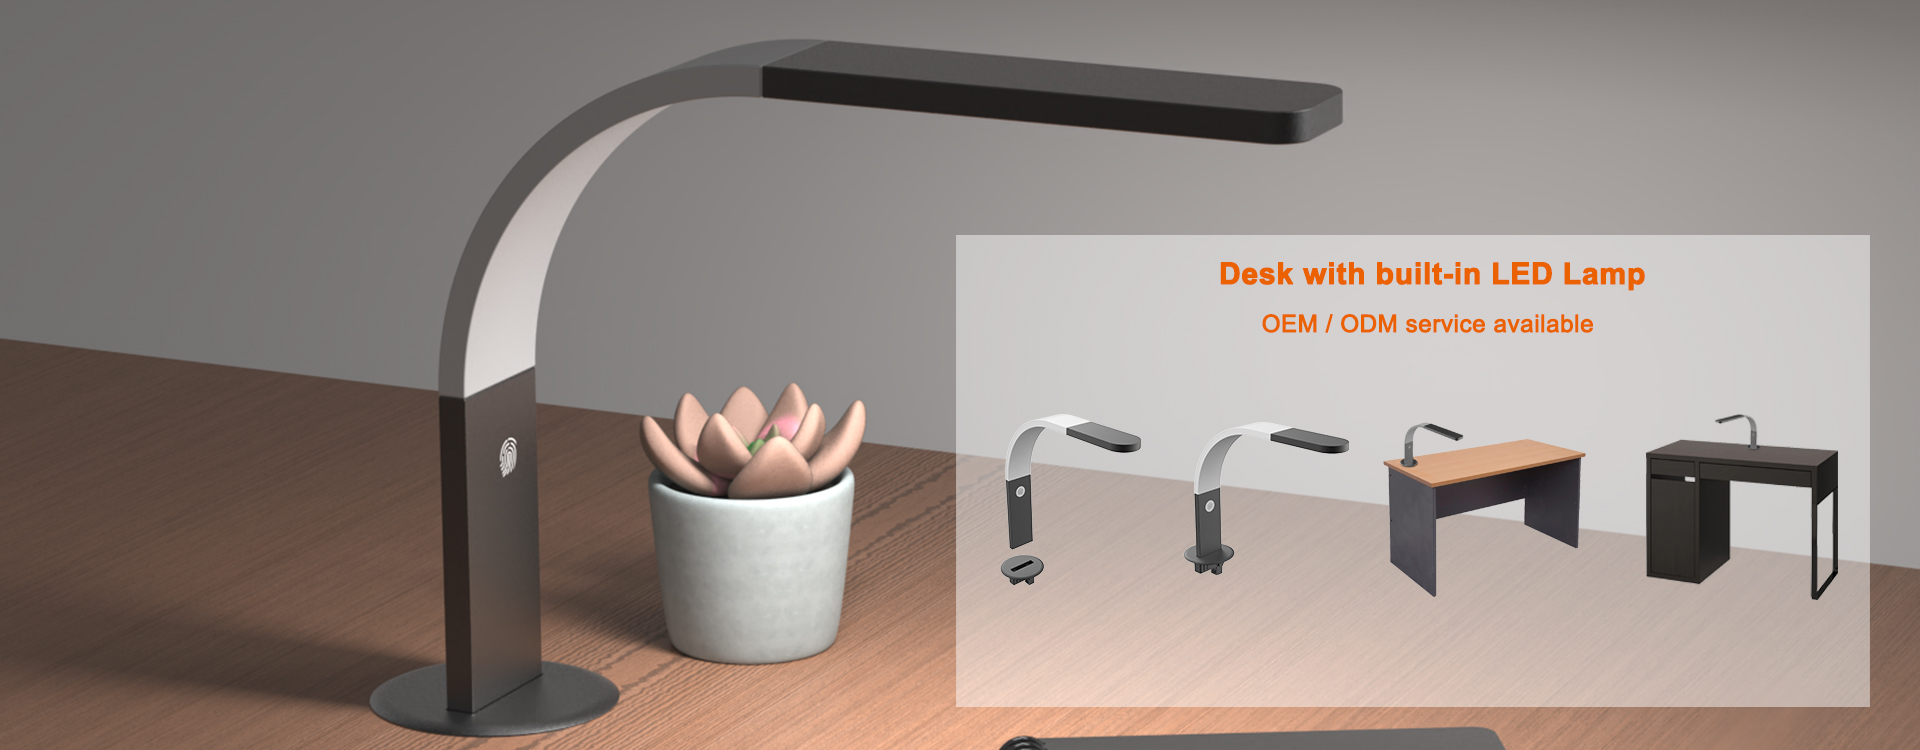 Desk with built-in LED lamp